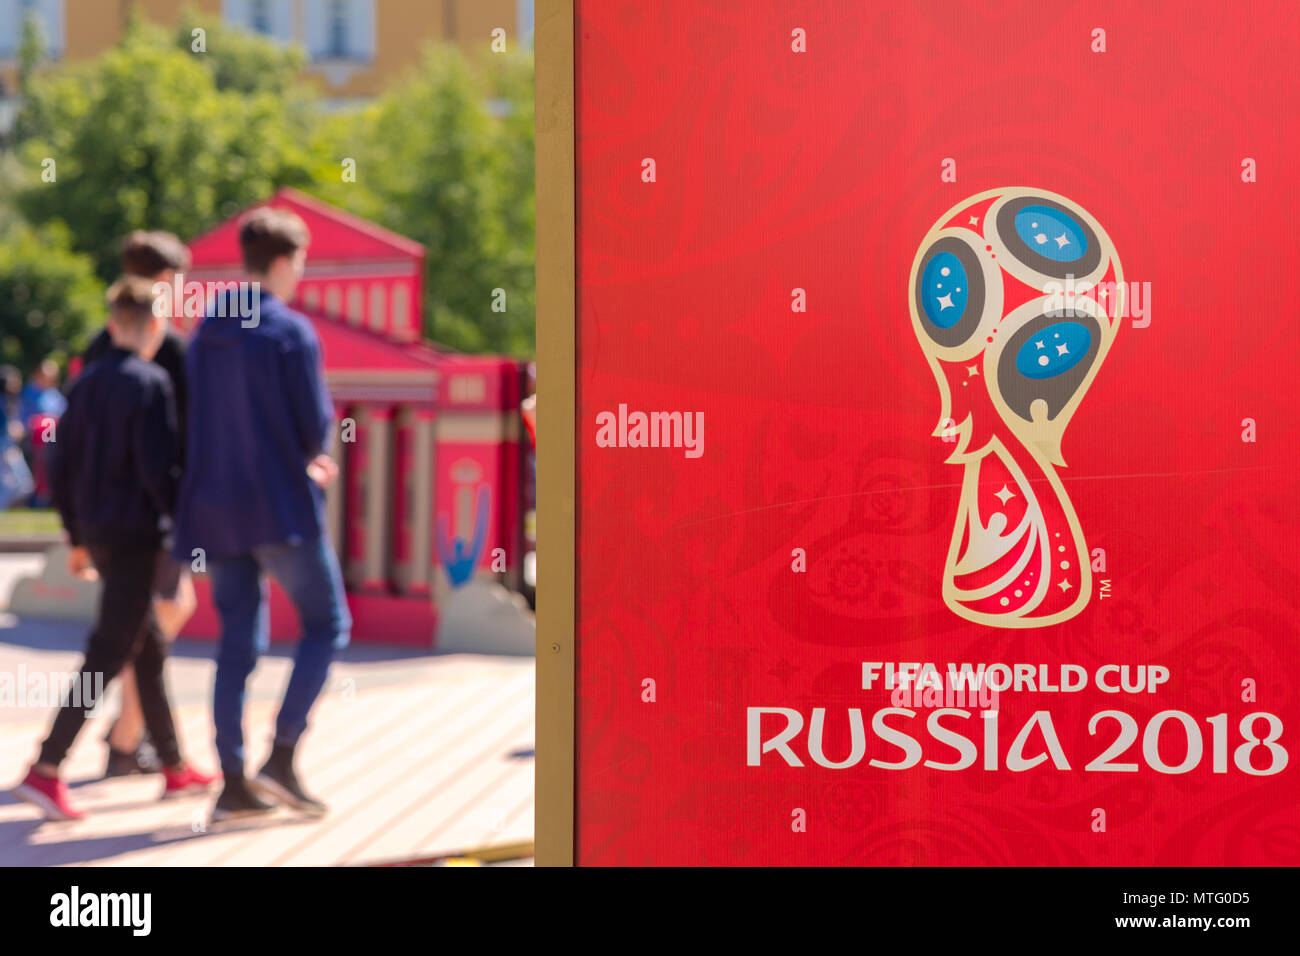 MOSCOW, RUSSIA - MAY 26, 2018: Official logo FIFA World Cup 2018 in Russia printed on a red background canvas, at Manezh Square. Walking people, Kreml Stock Photo